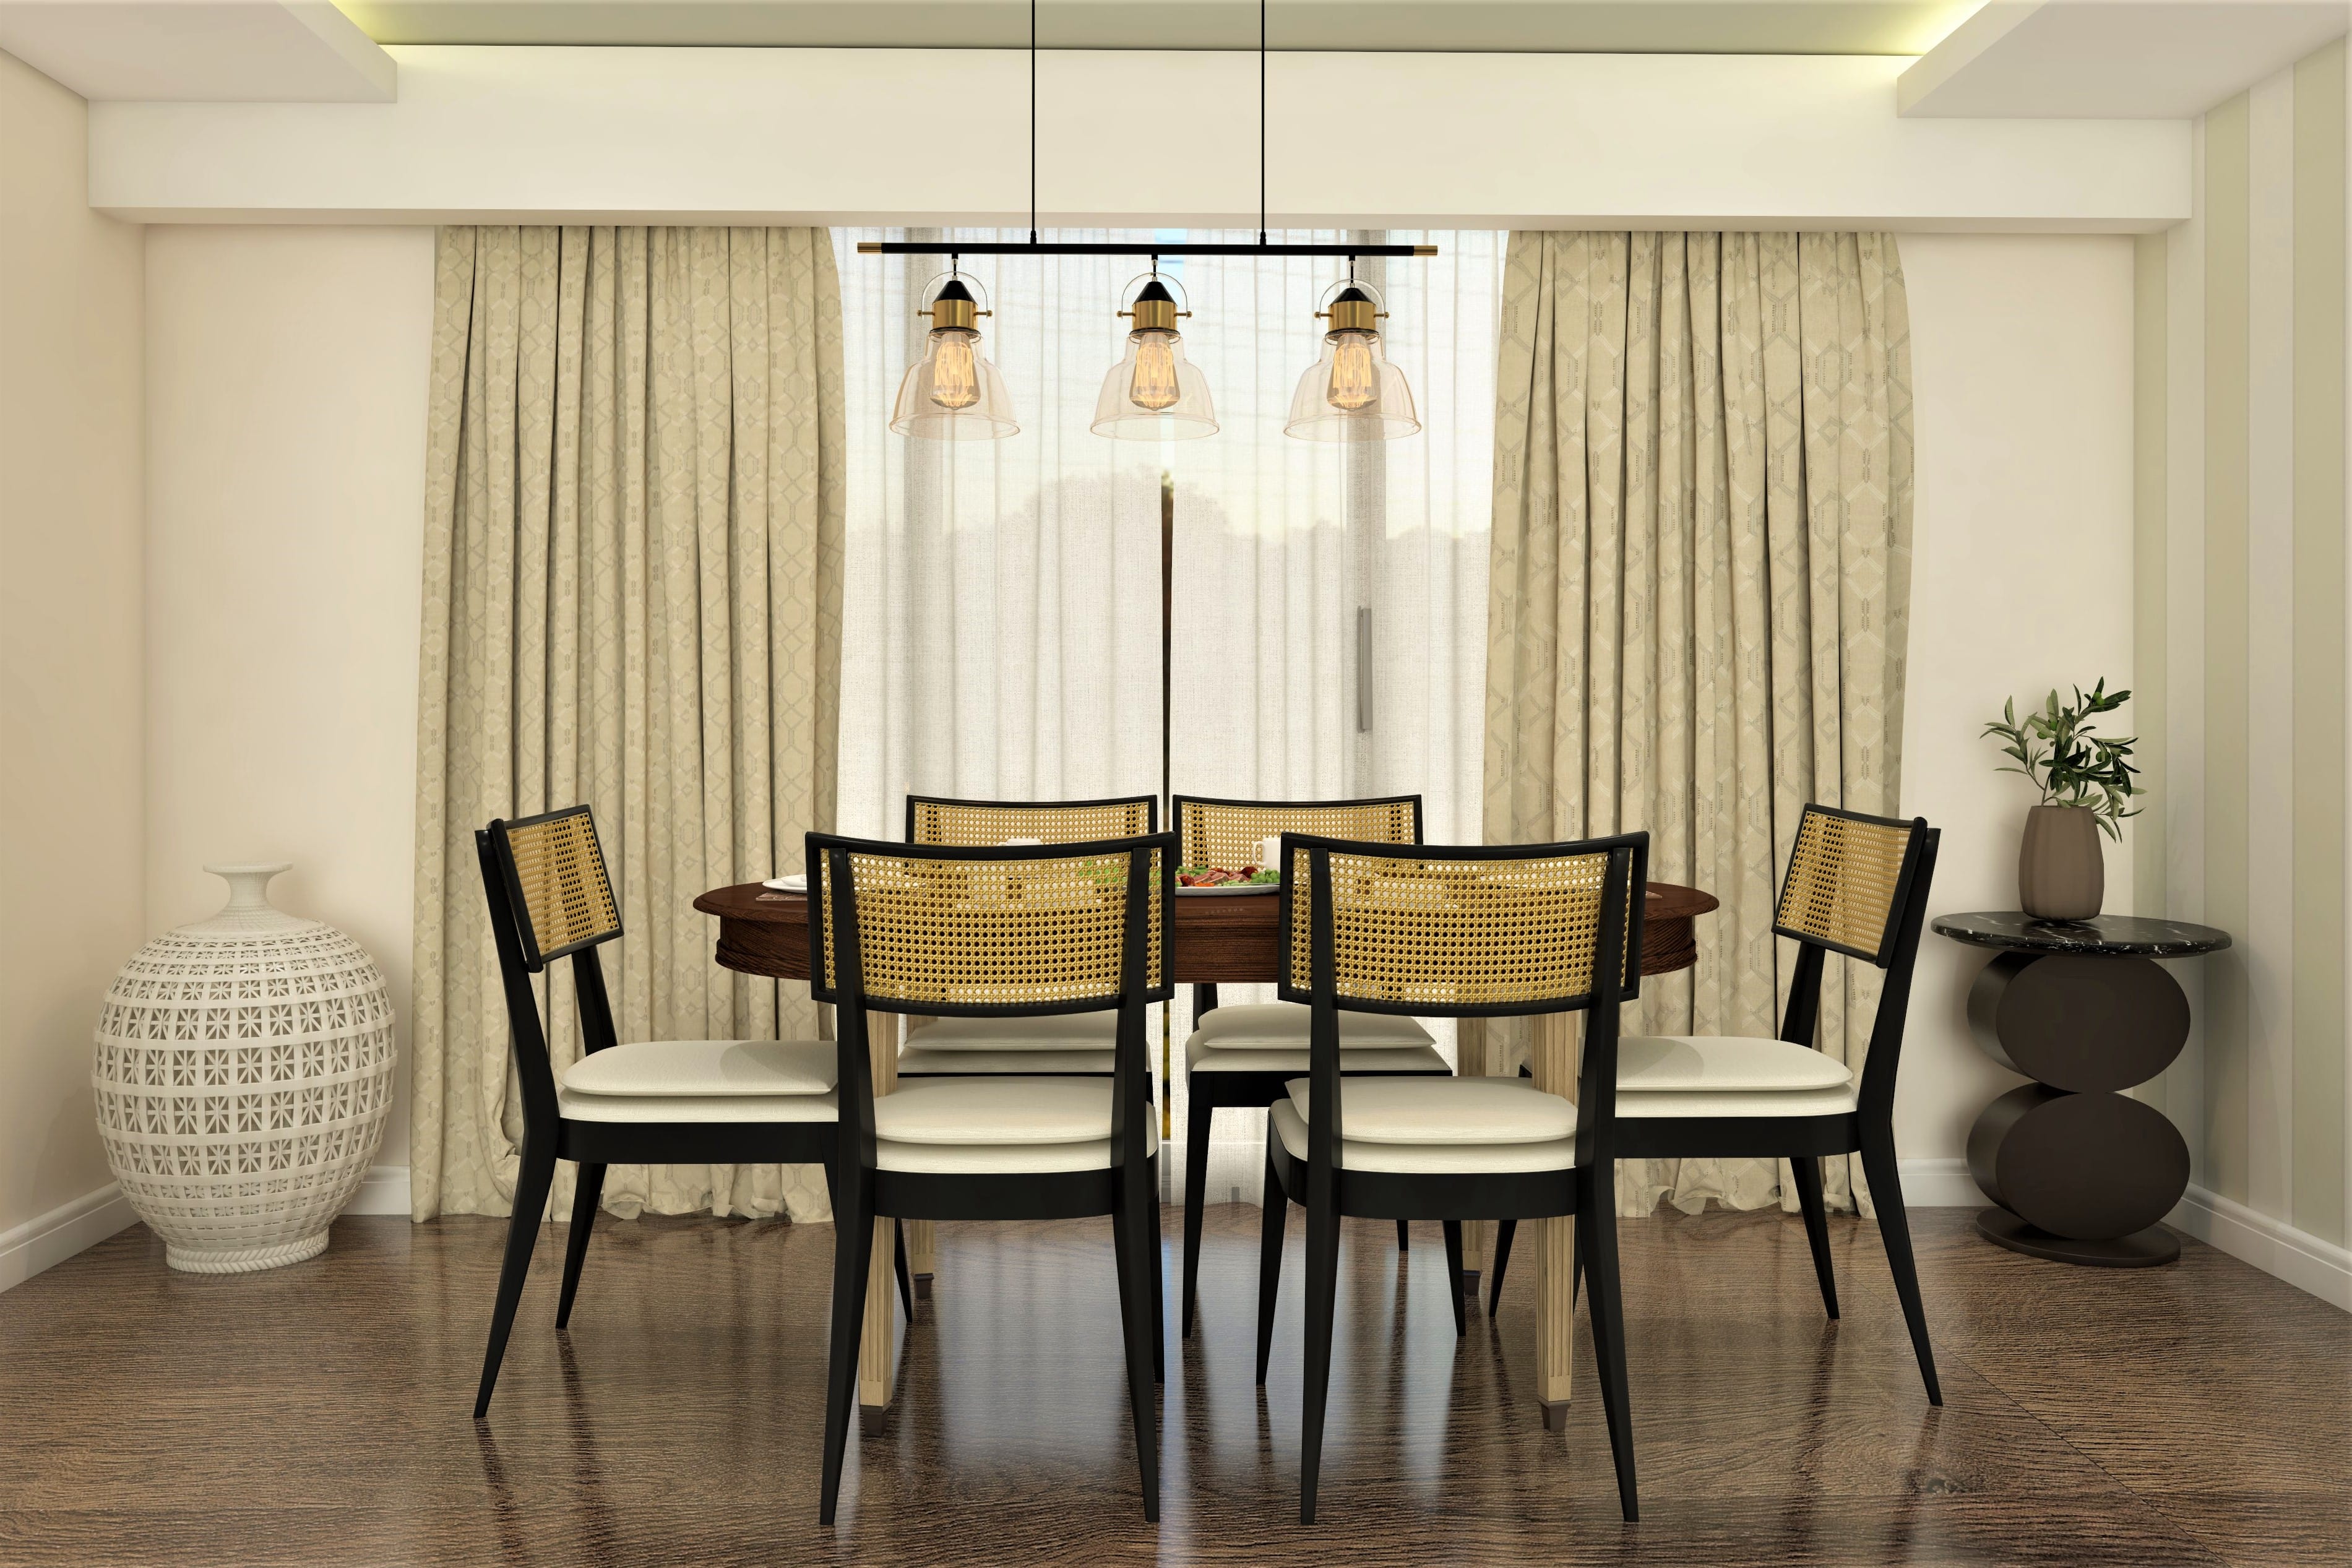 Fusion Indian contemporary dining room design - Beautiful Homes